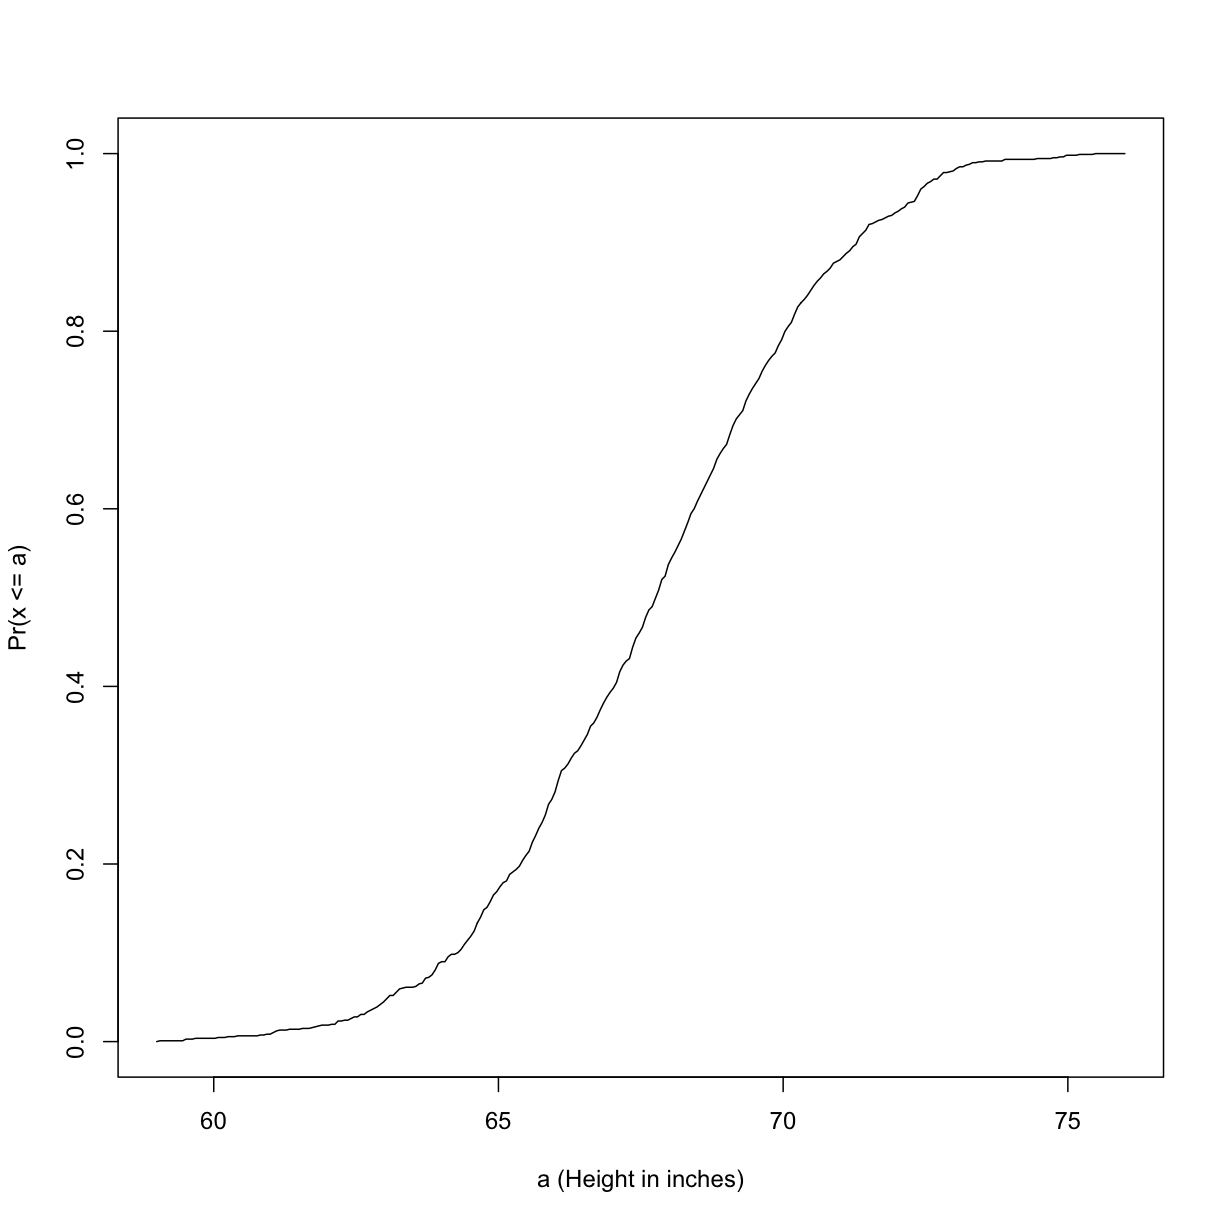 Empirical cumulative distribution function for height.